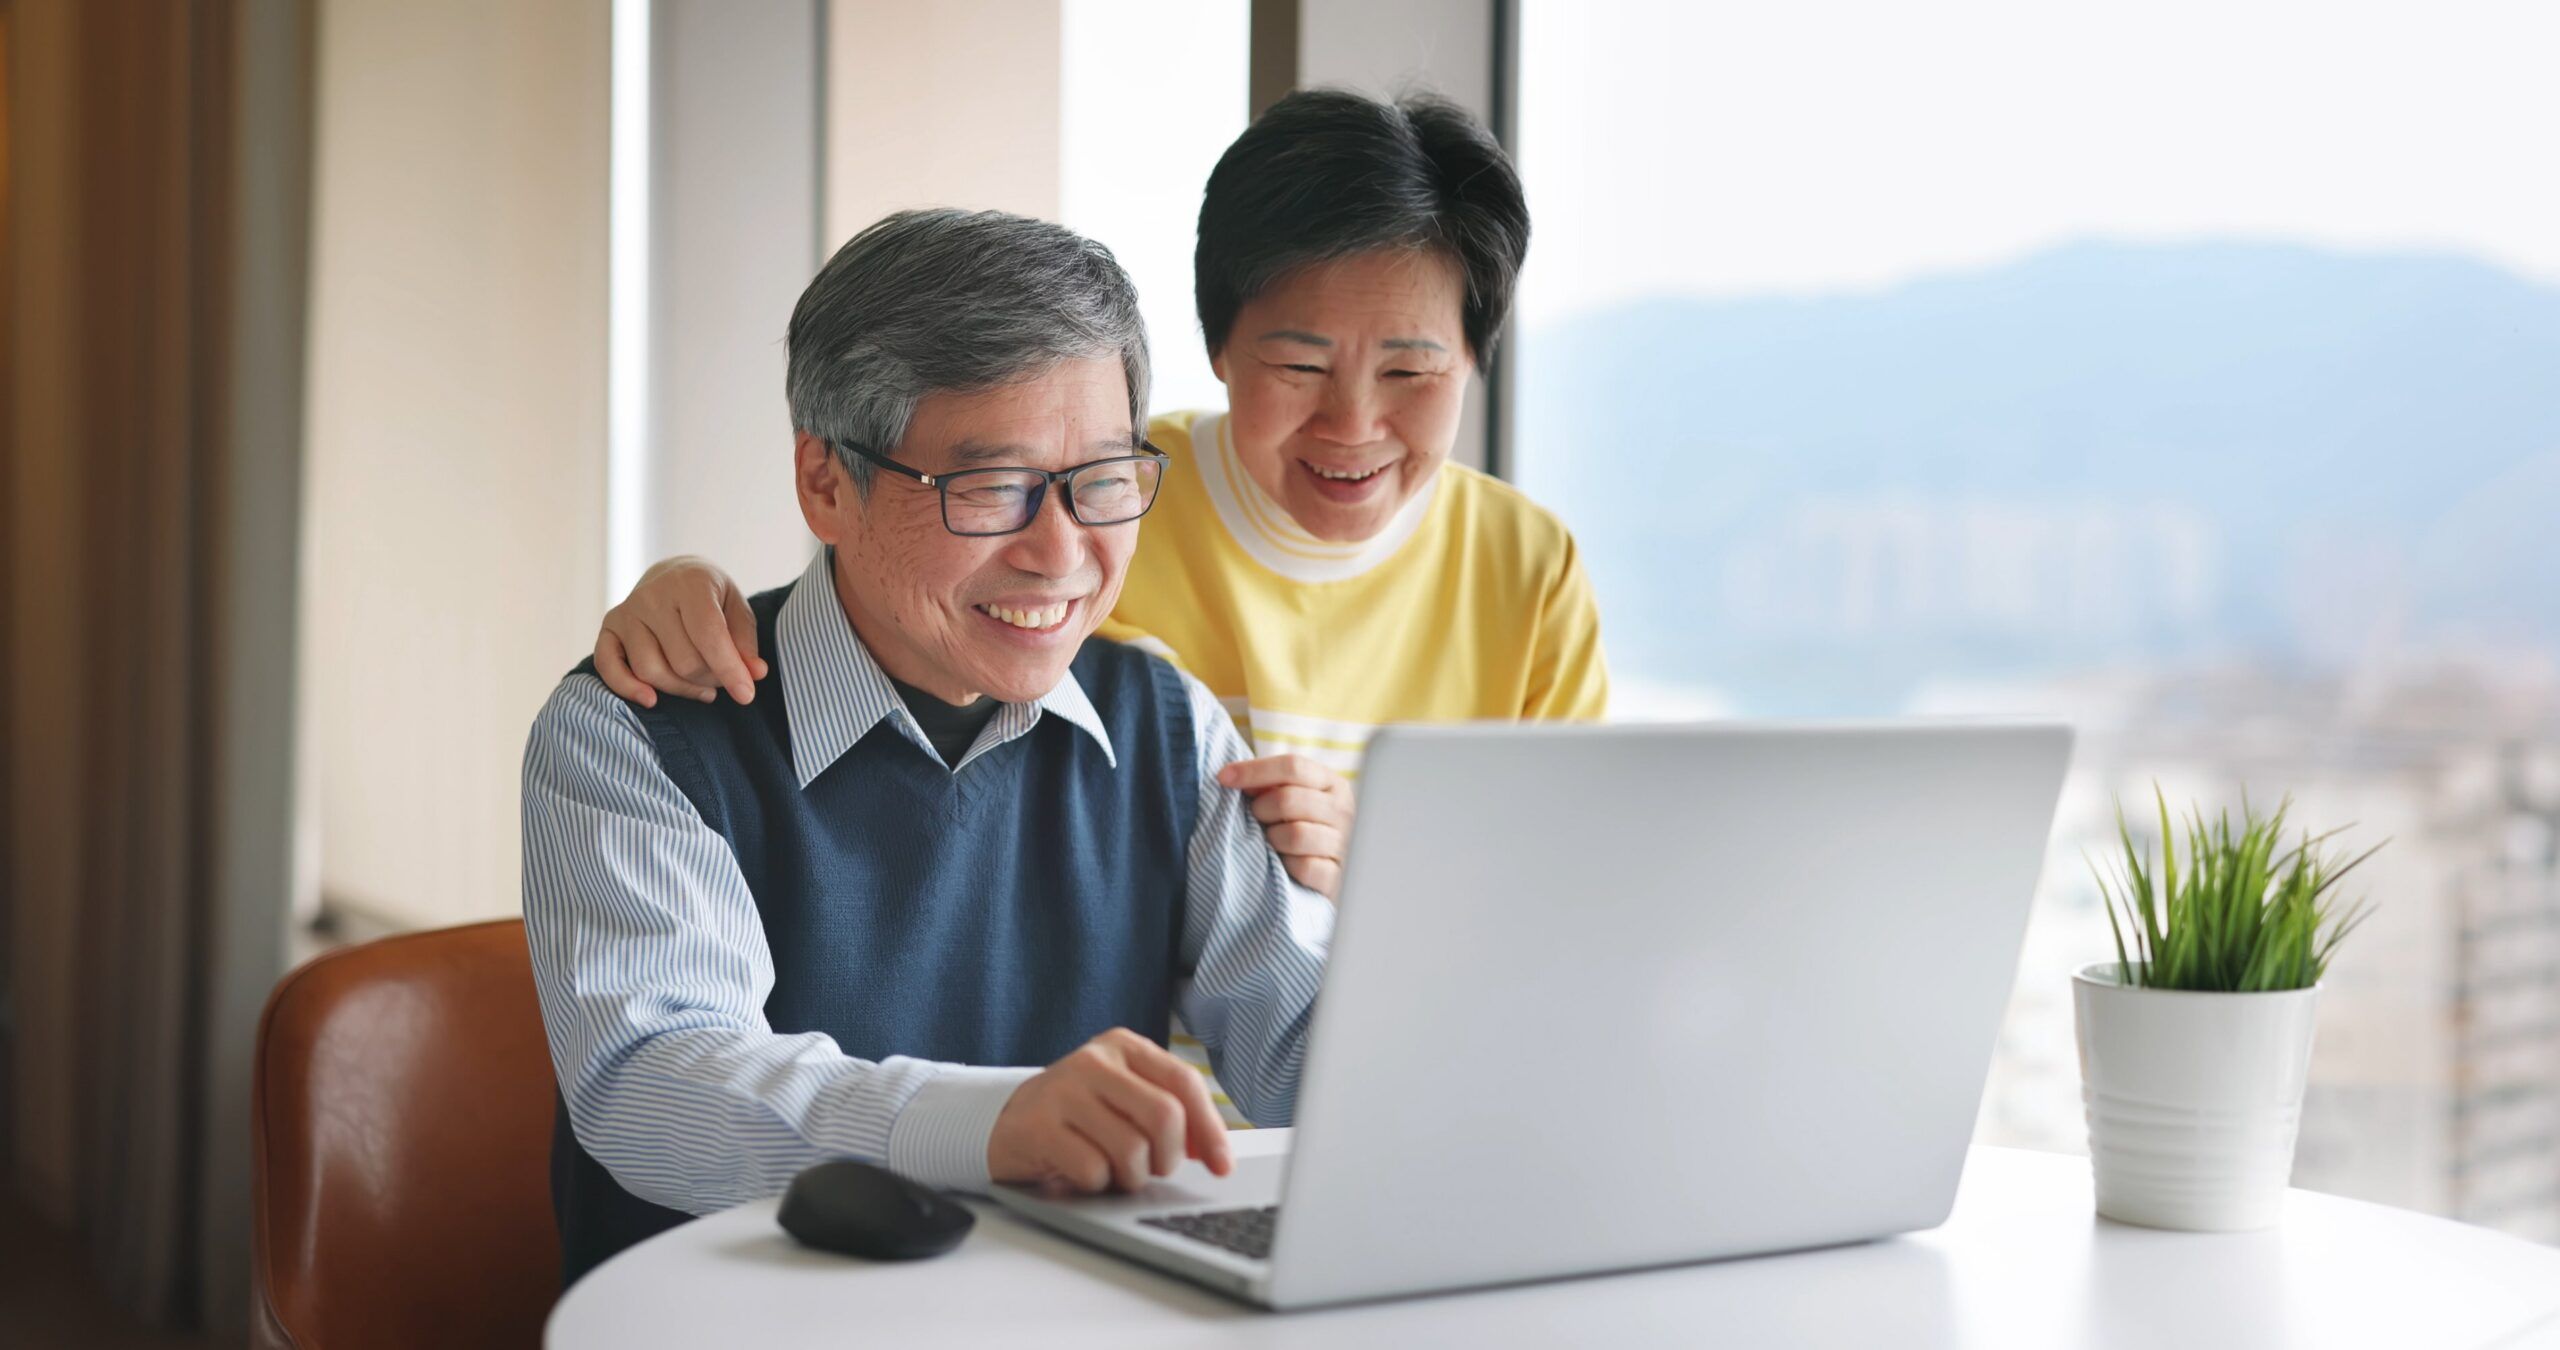 Asian senior couple are smiling and using a laptop near a window, with mountainous landscape in the background.